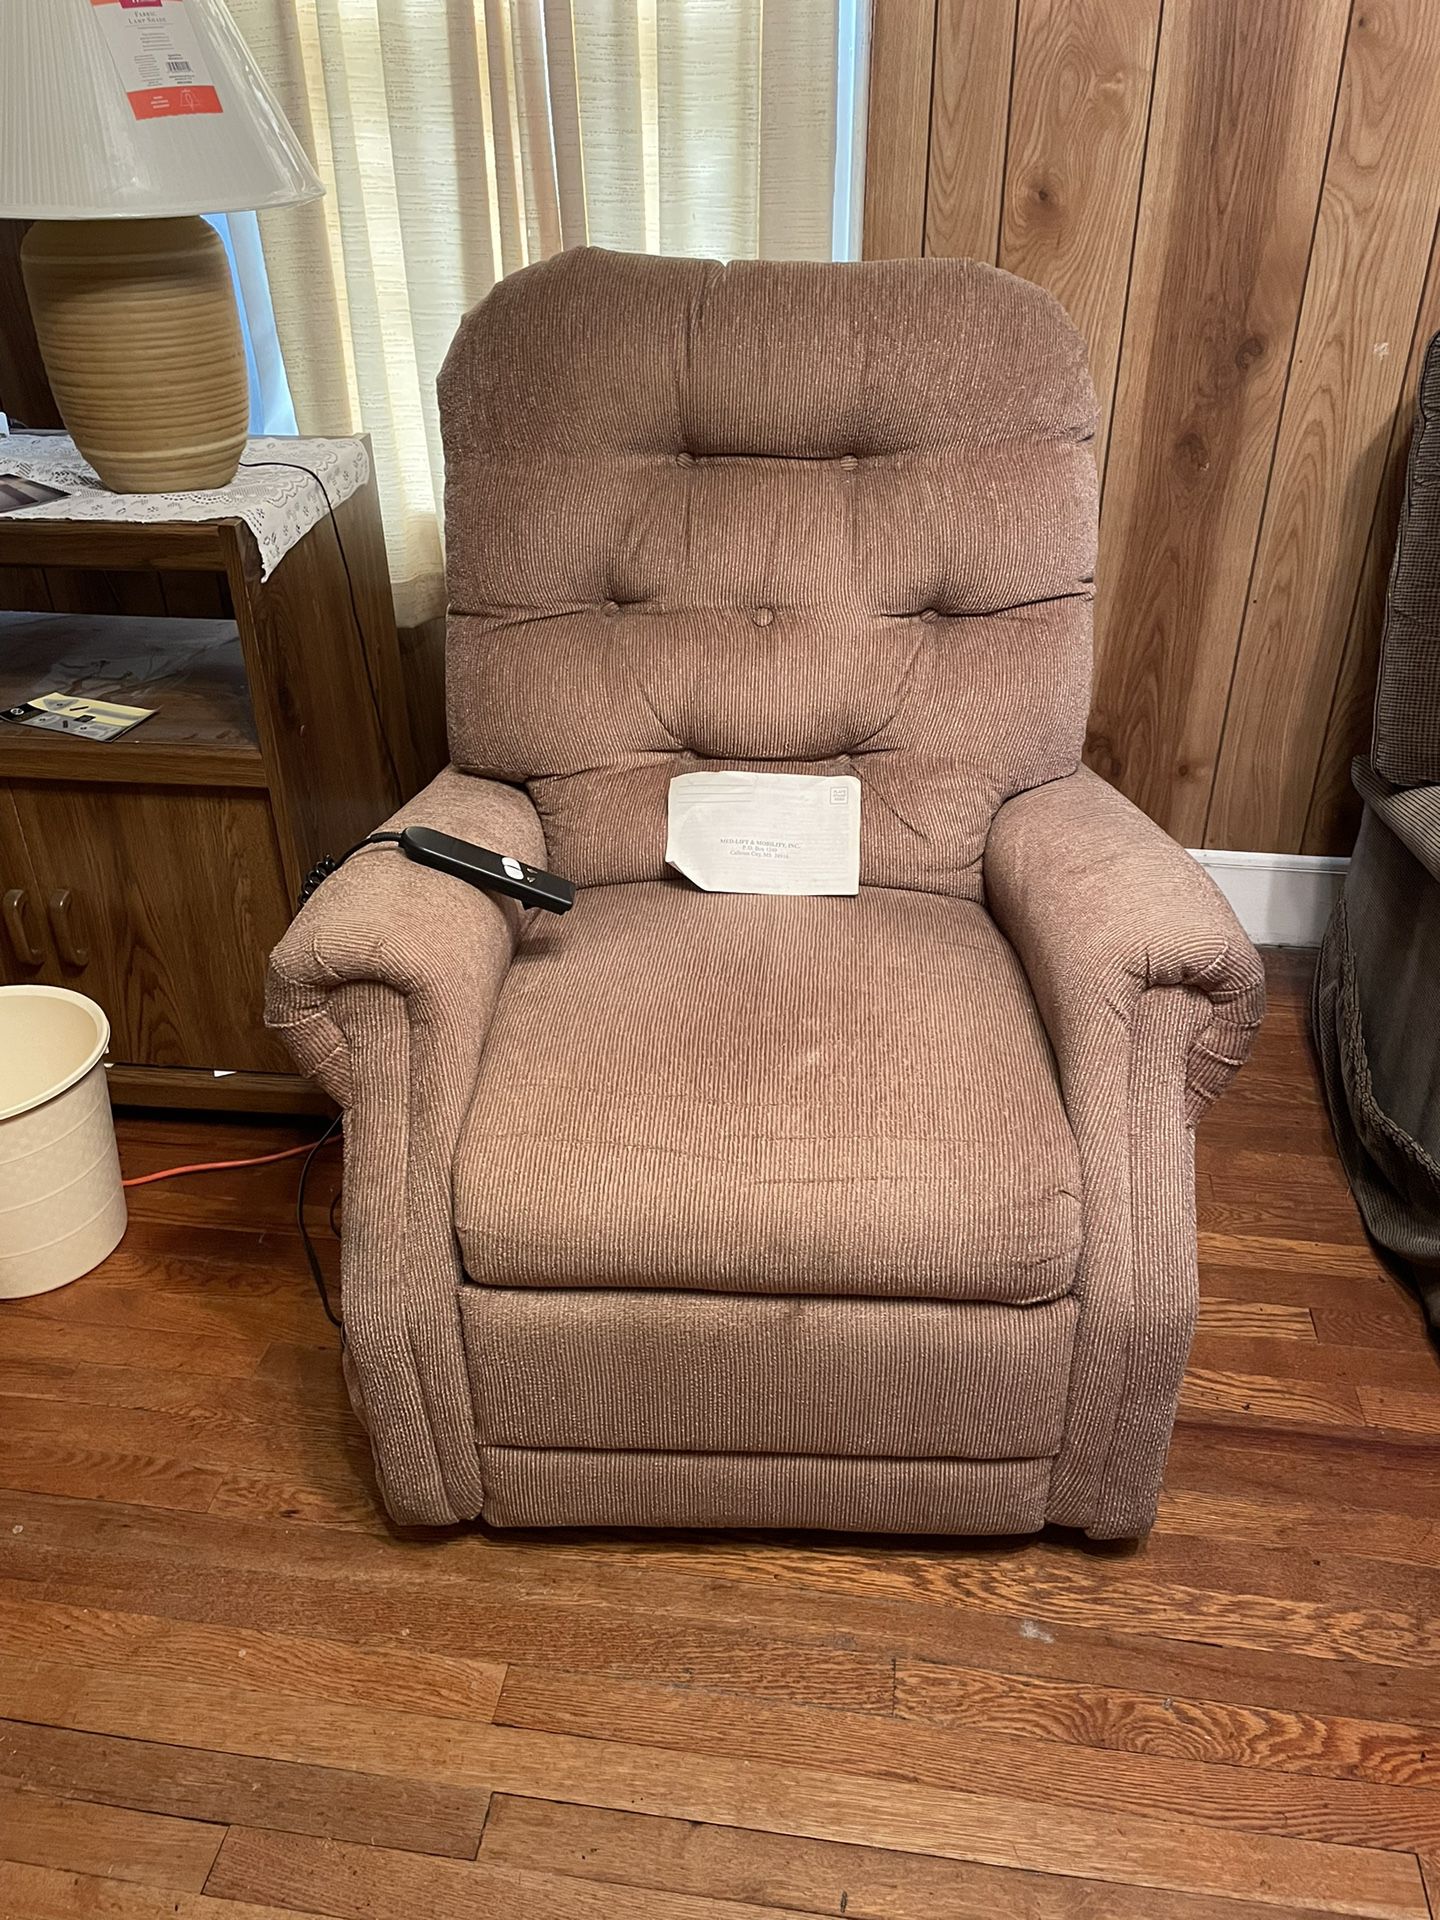 Gently Used Help Chair And Couch